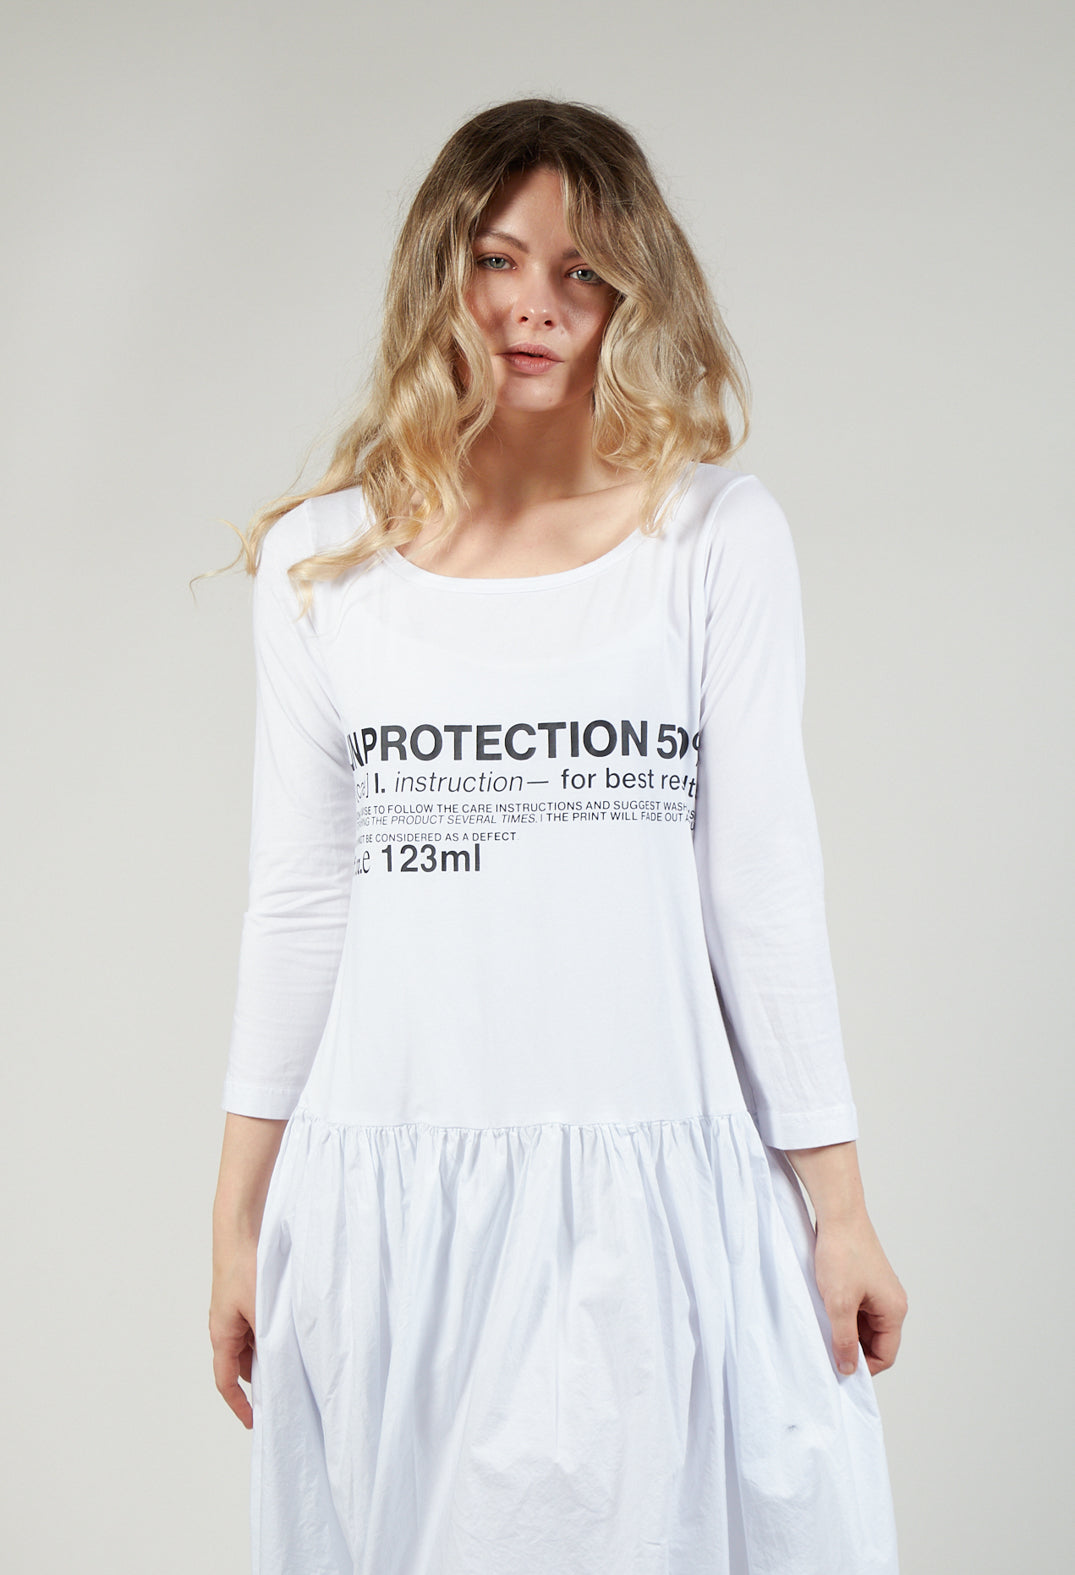 Jersey Top Dress with Lettering Motif in White Print